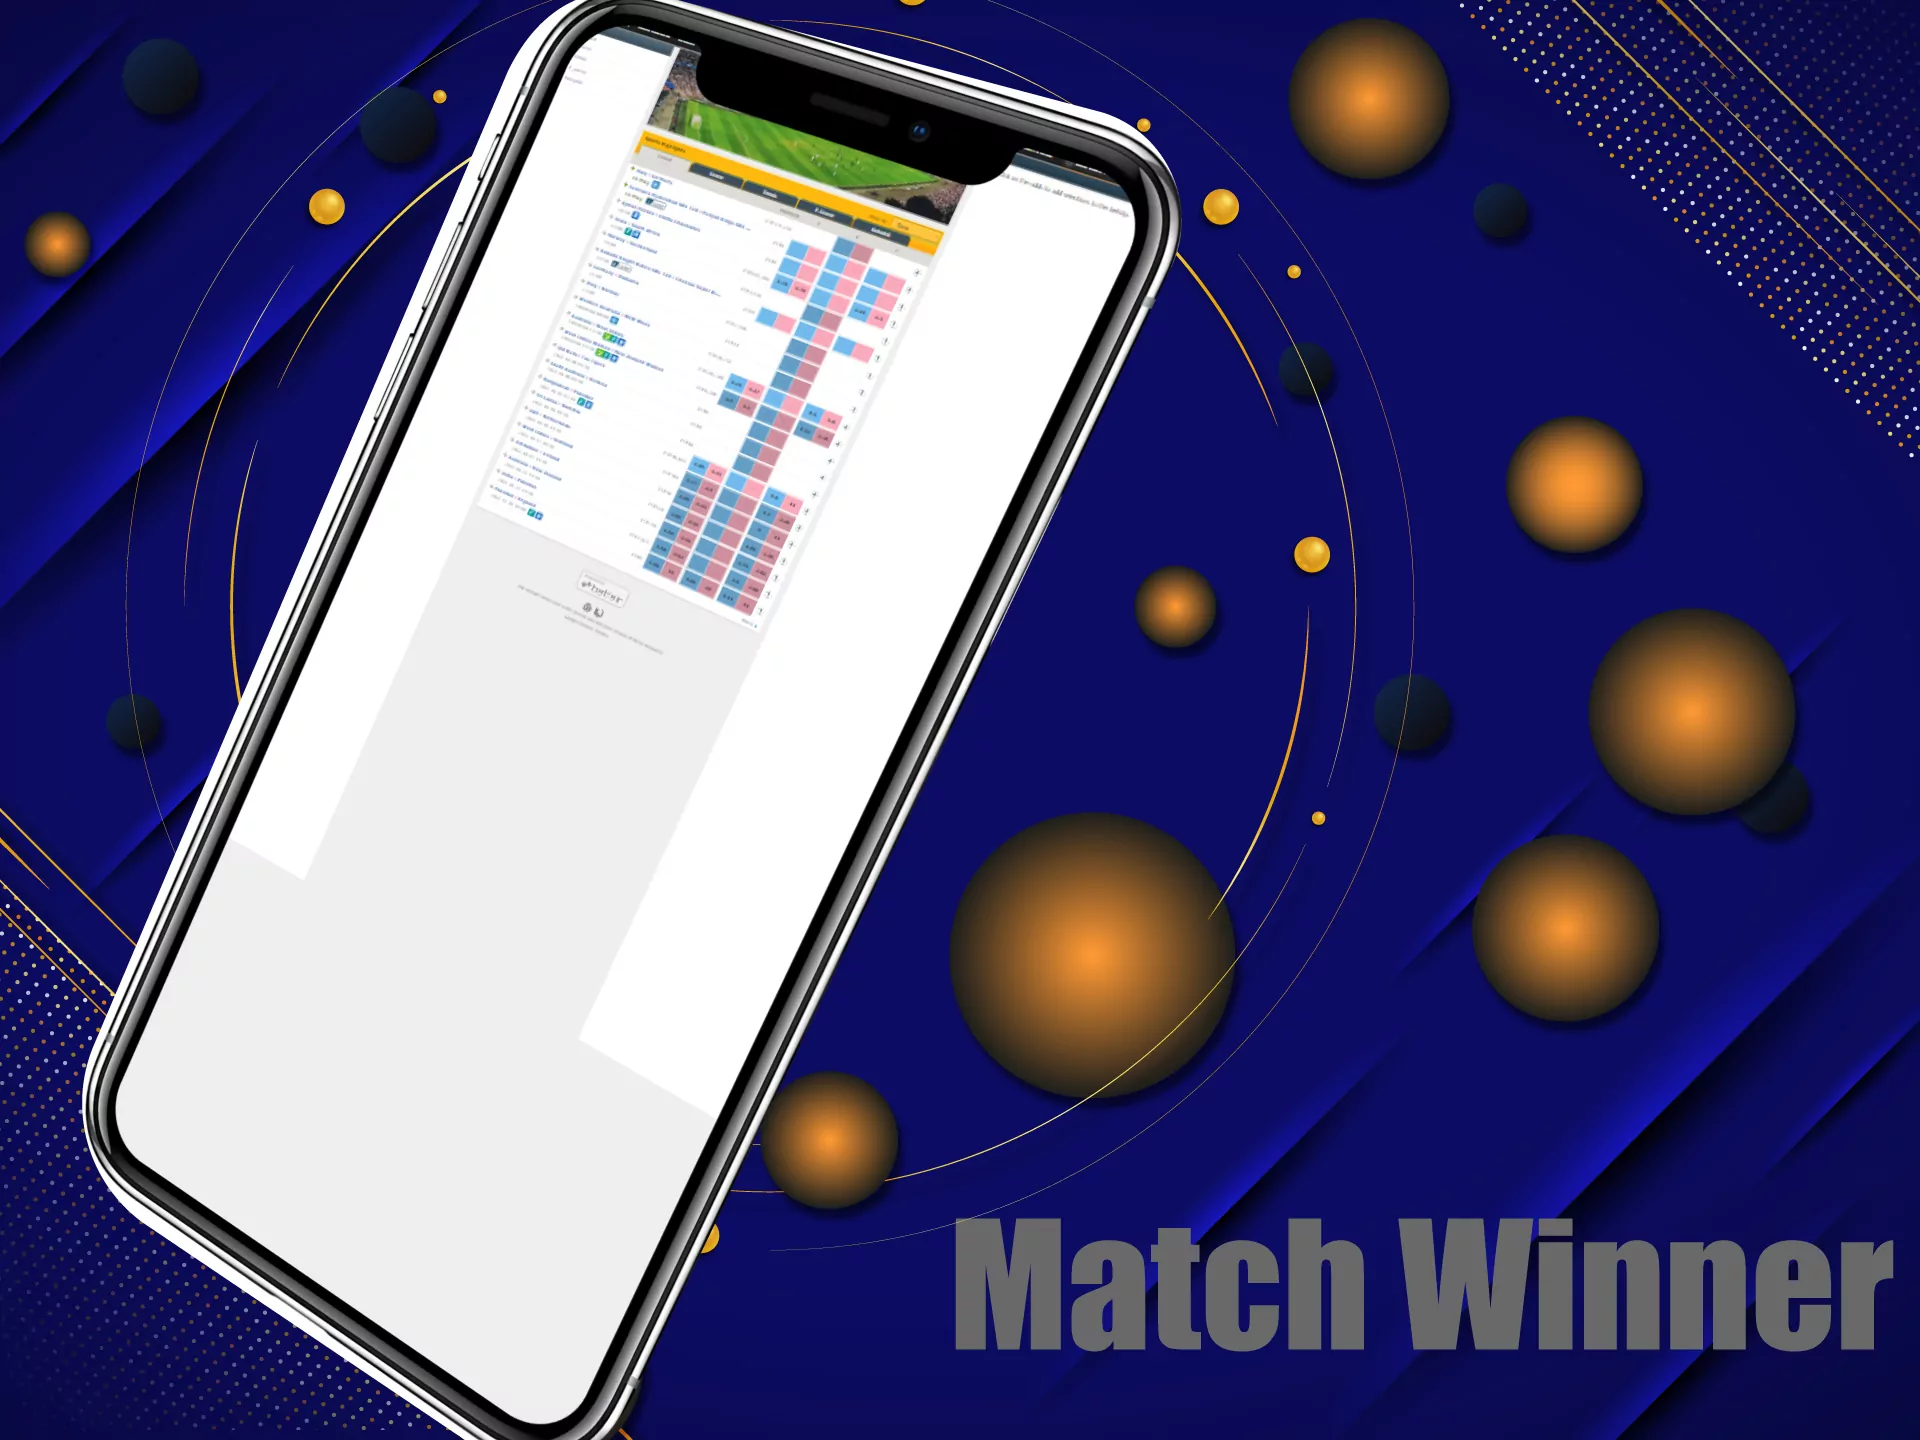 You can bet on the winner of the match in the ICCWIN app.